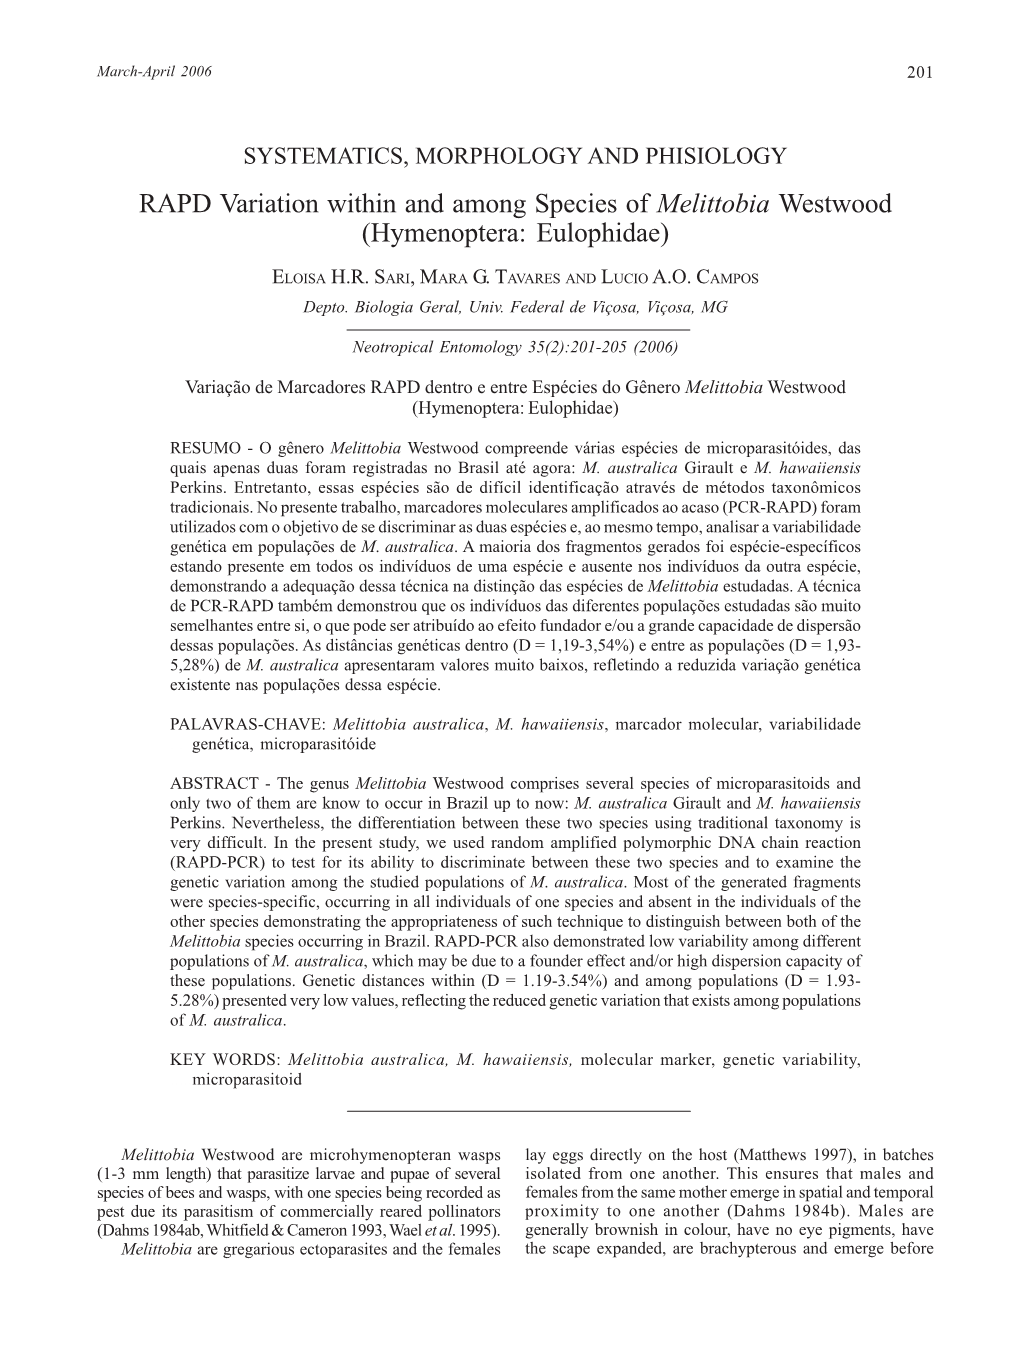 RAPD Variation Within and Among Species of Melittobia Westwood (Hymenoptera: Eulophidae)